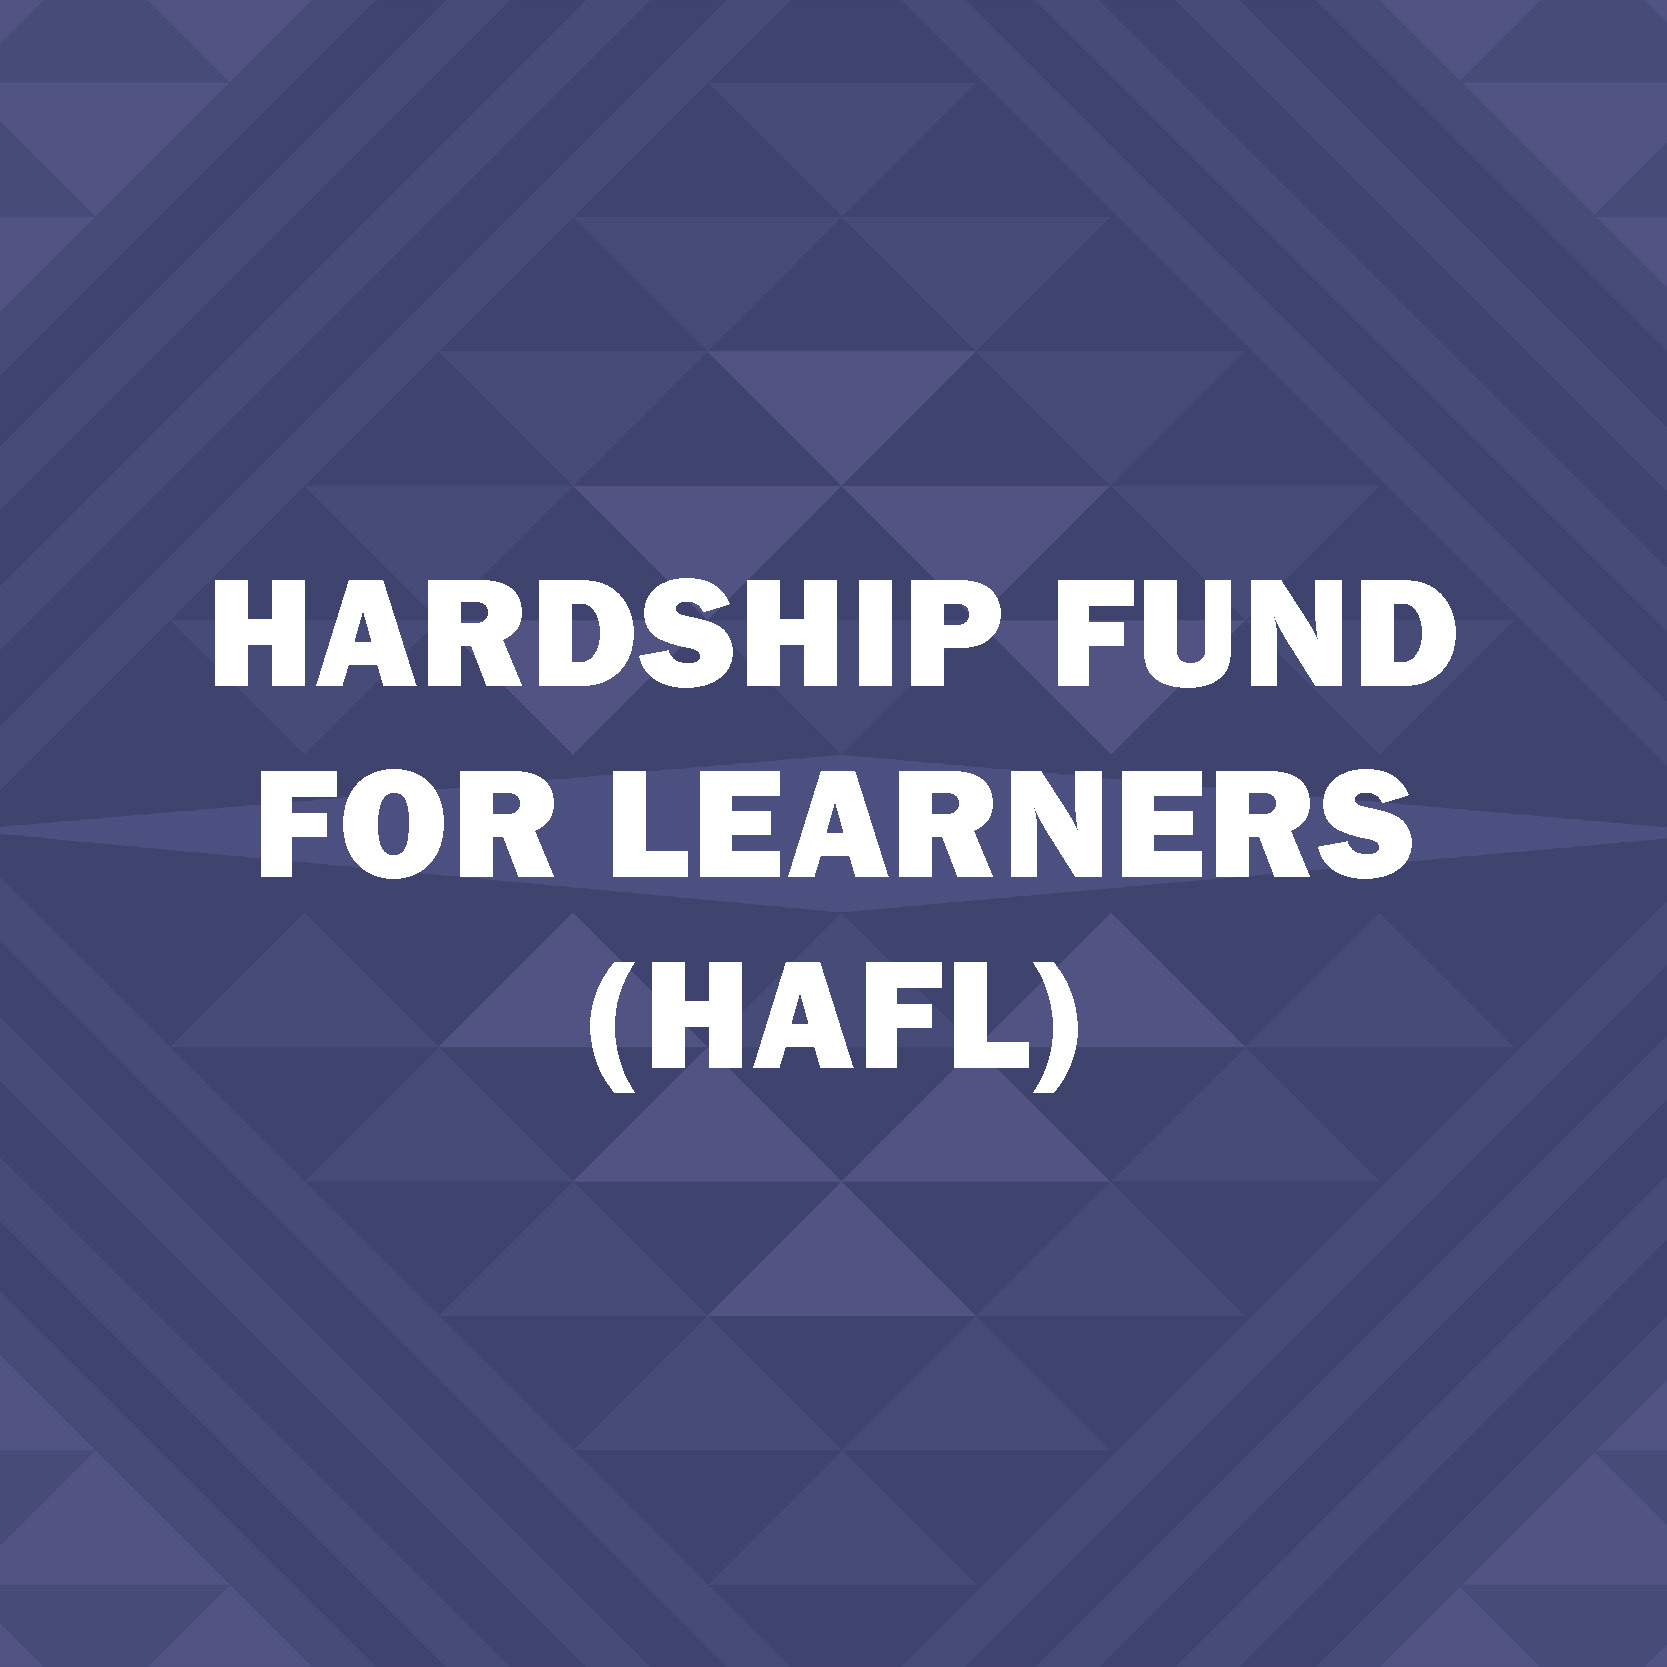 Hardship Fund for Learners (HAFL)